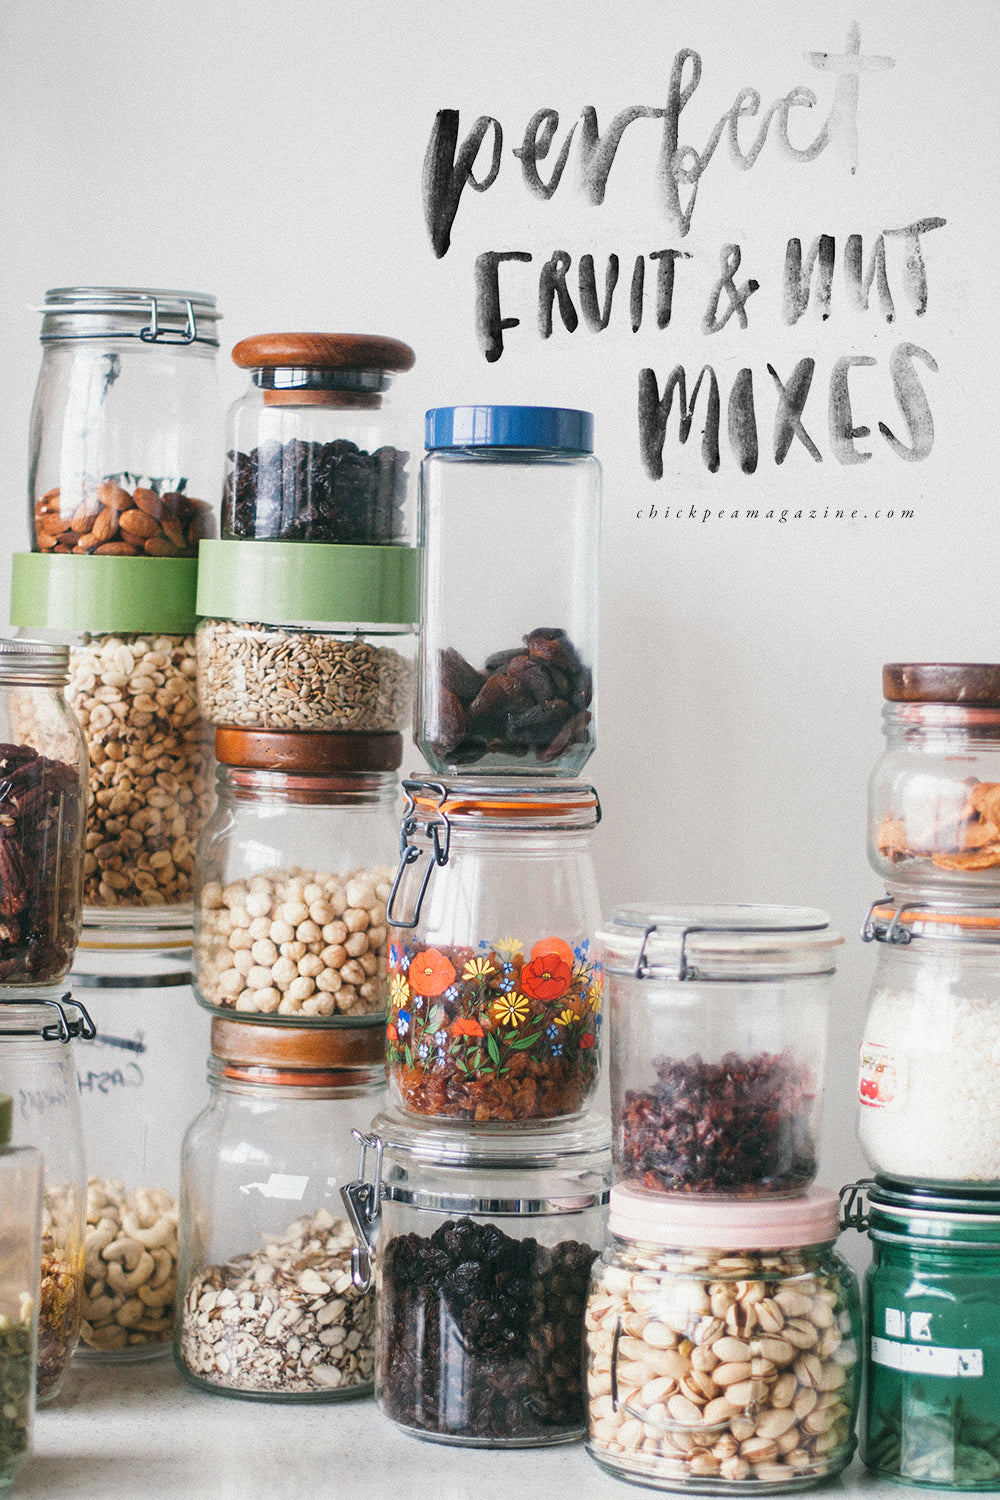 fruit and nut mixes for snacking